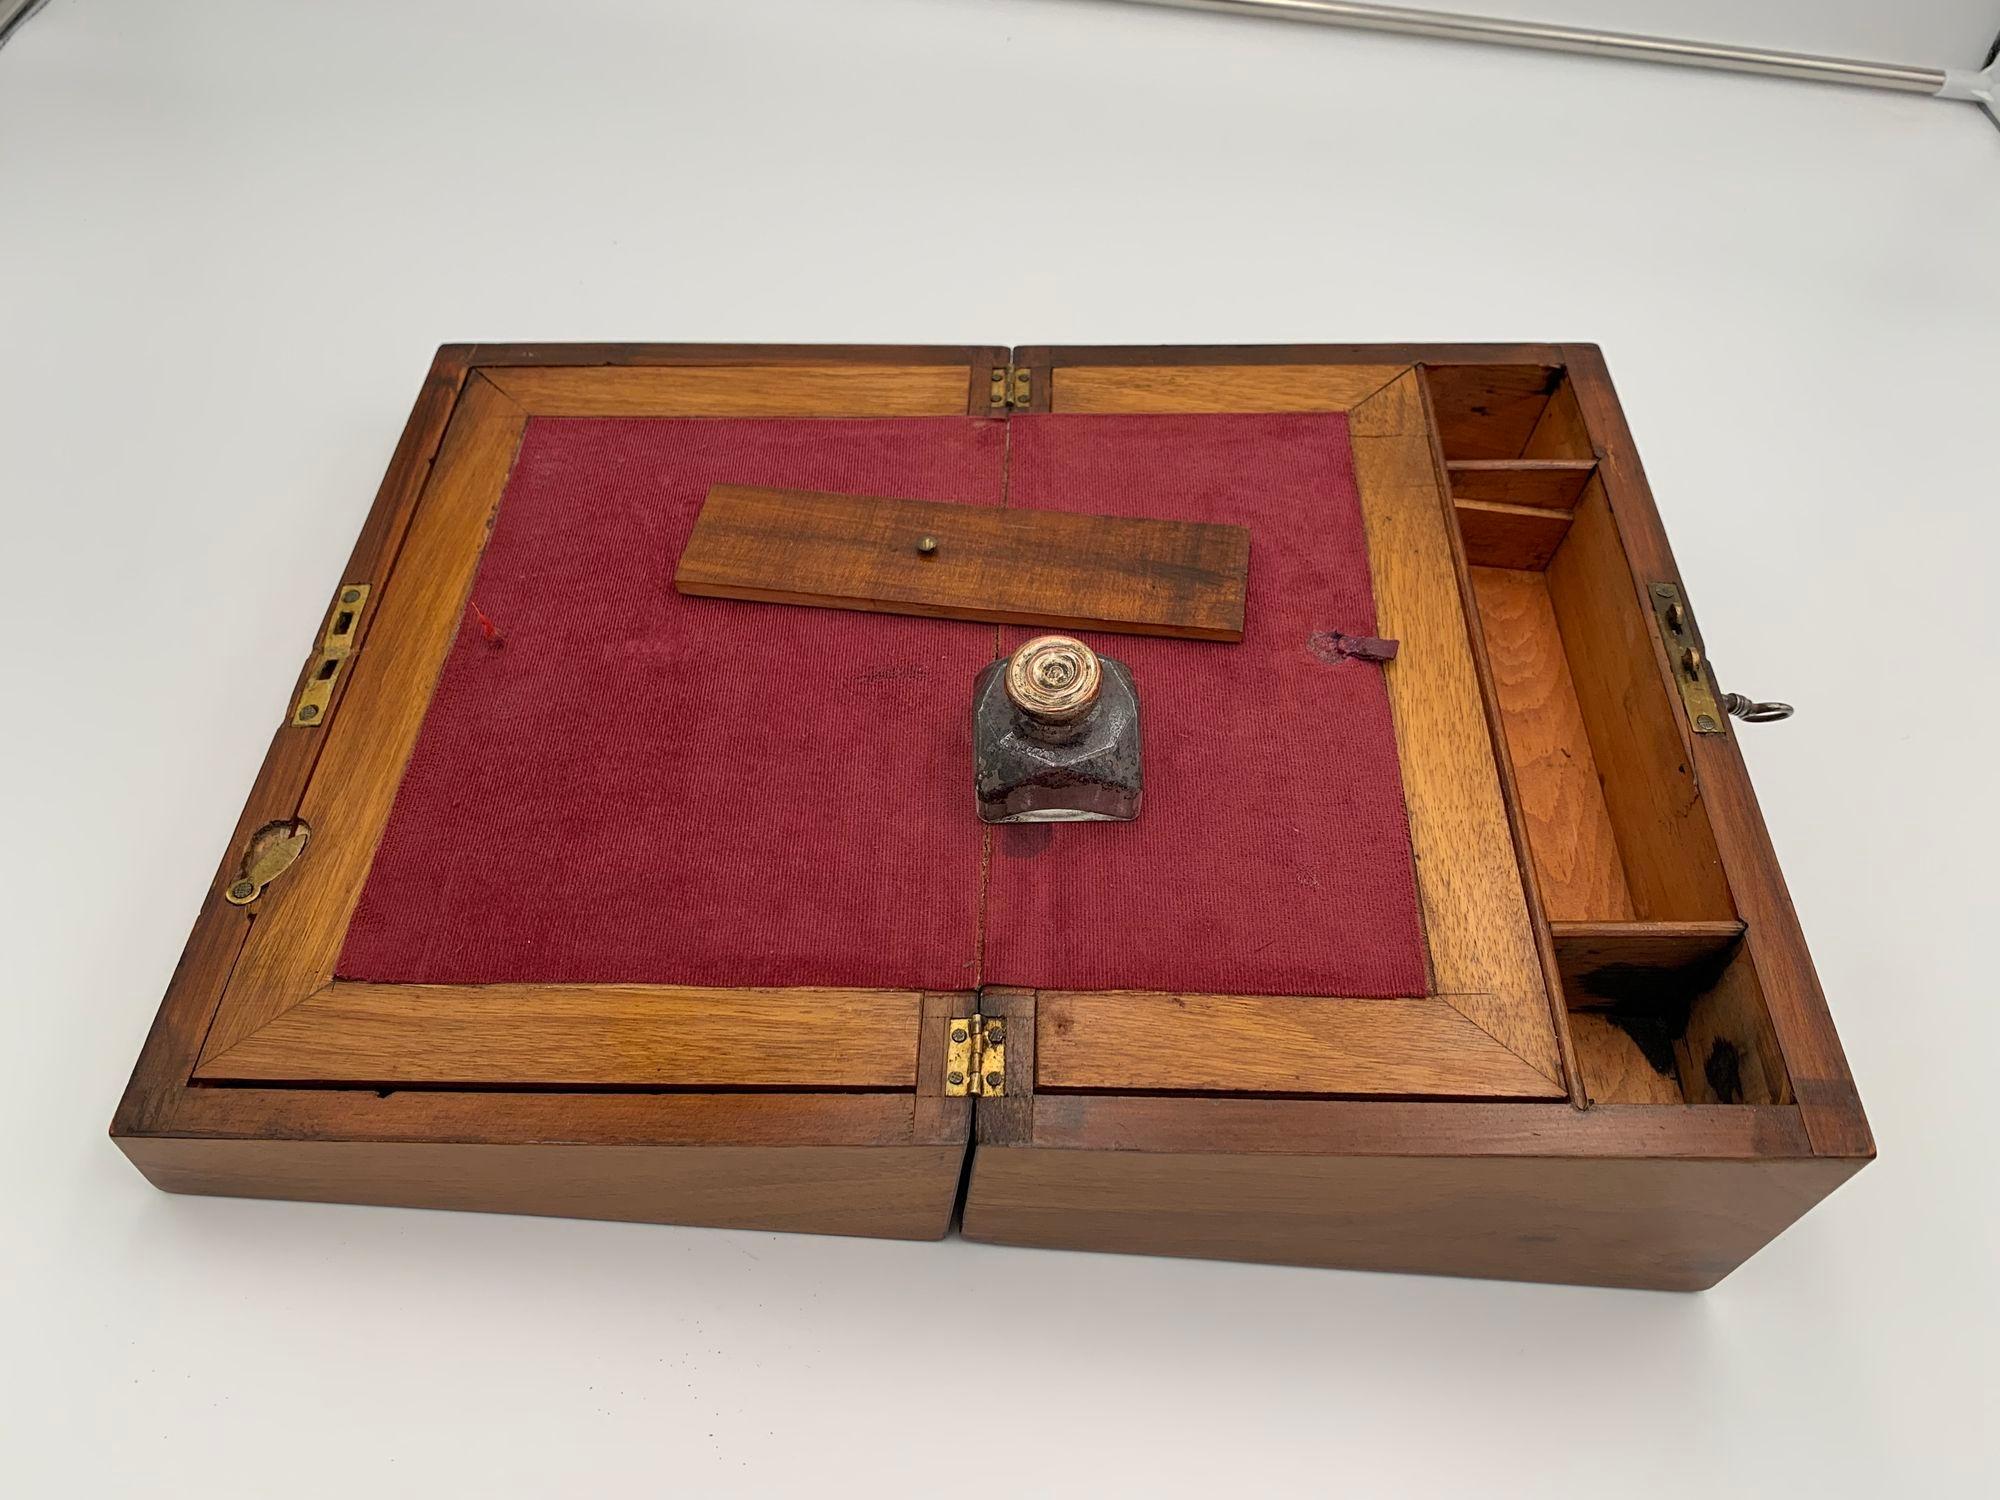 Beautiful antique writing box from the historicism / Victorian style from England, 2nd half of the 19th century.
 
Walnut veneered inlaid with various colored woods. Can be opened with an inclined writing surface. Old glass inkwell and red felt.